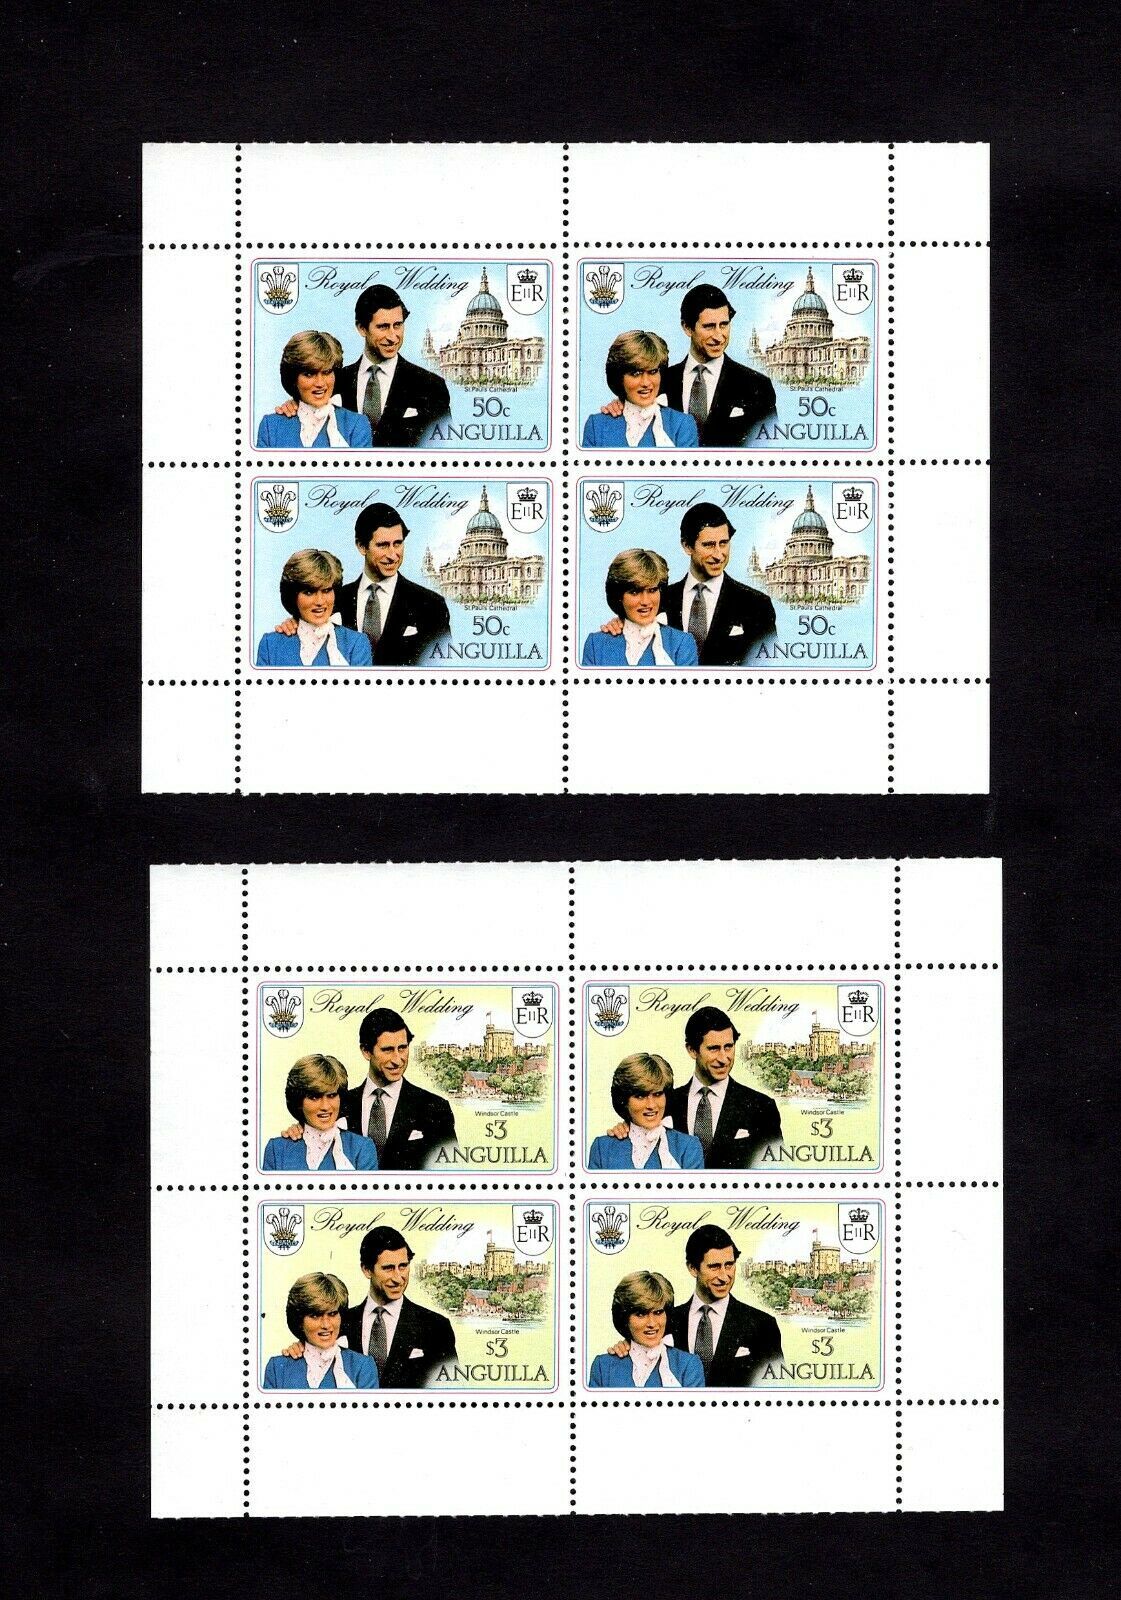 Lot of 3 Different Mint Never Hinged Full 1981 Royal Wedding Stamp Sheets 